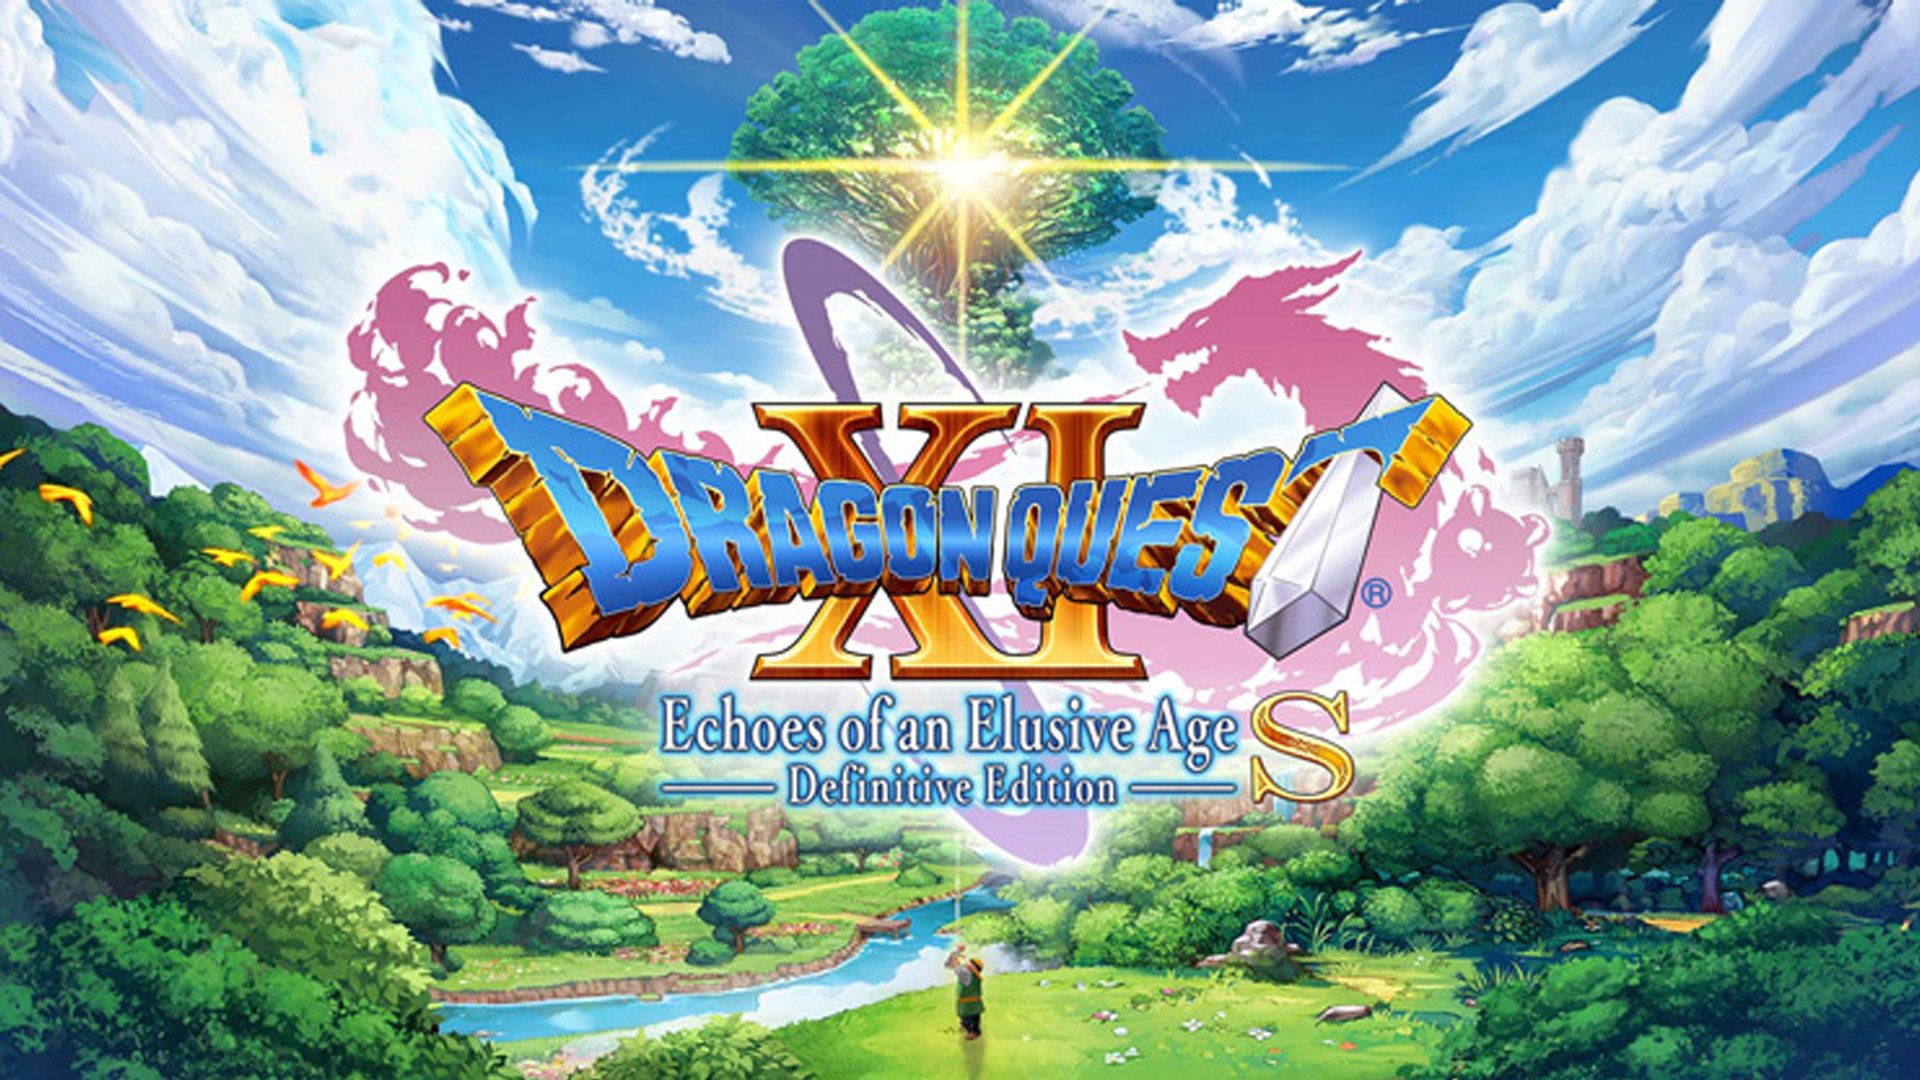 Dragon Quest Xi S Echoes Of An Elusive Age Definitive Edition Ps4 Review